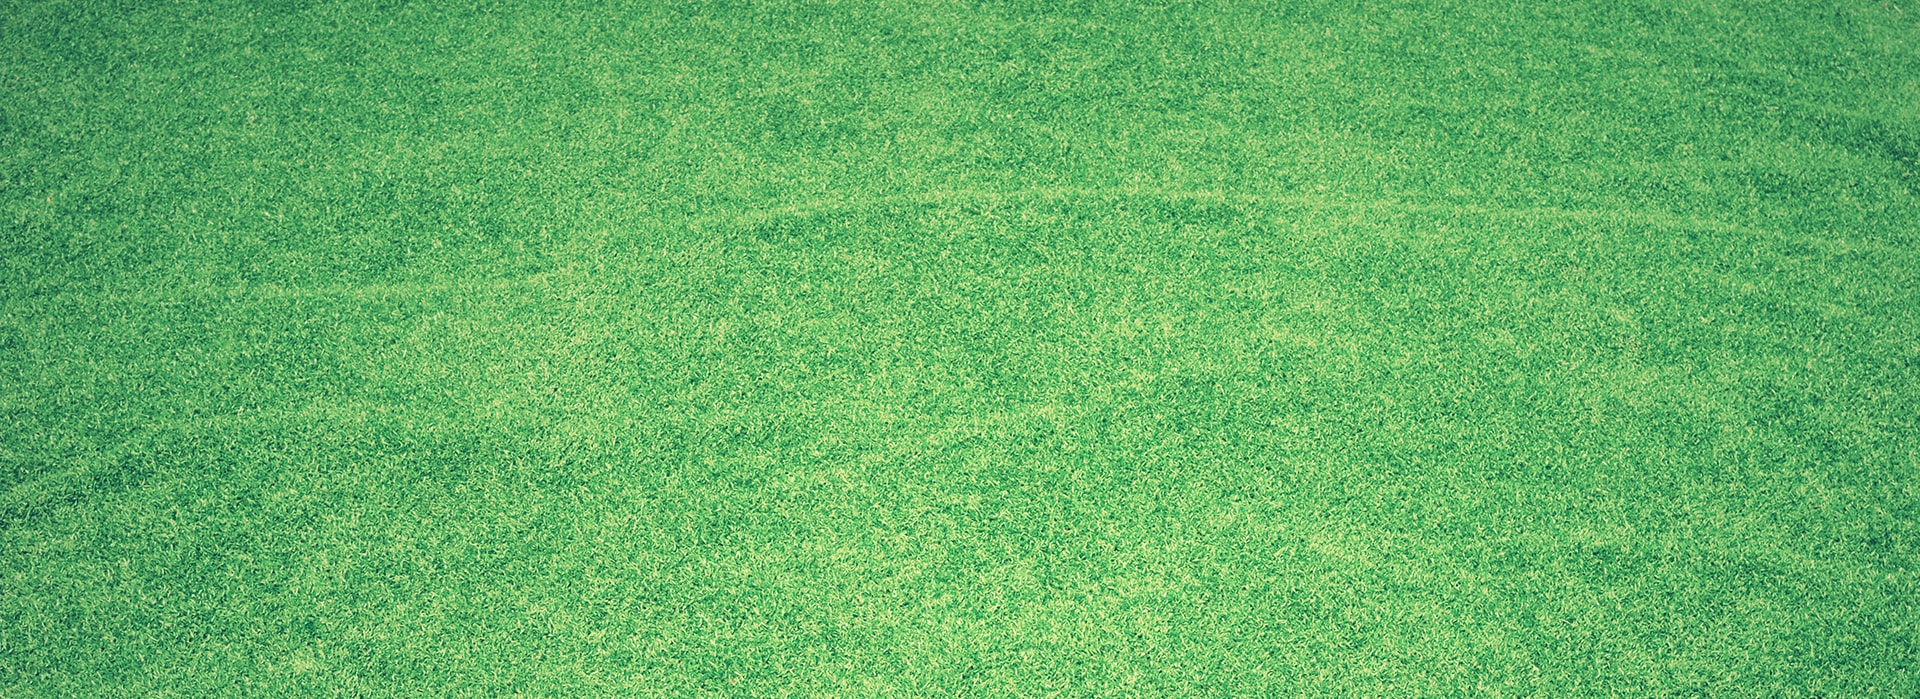 Turf Care Services in Chicagoland